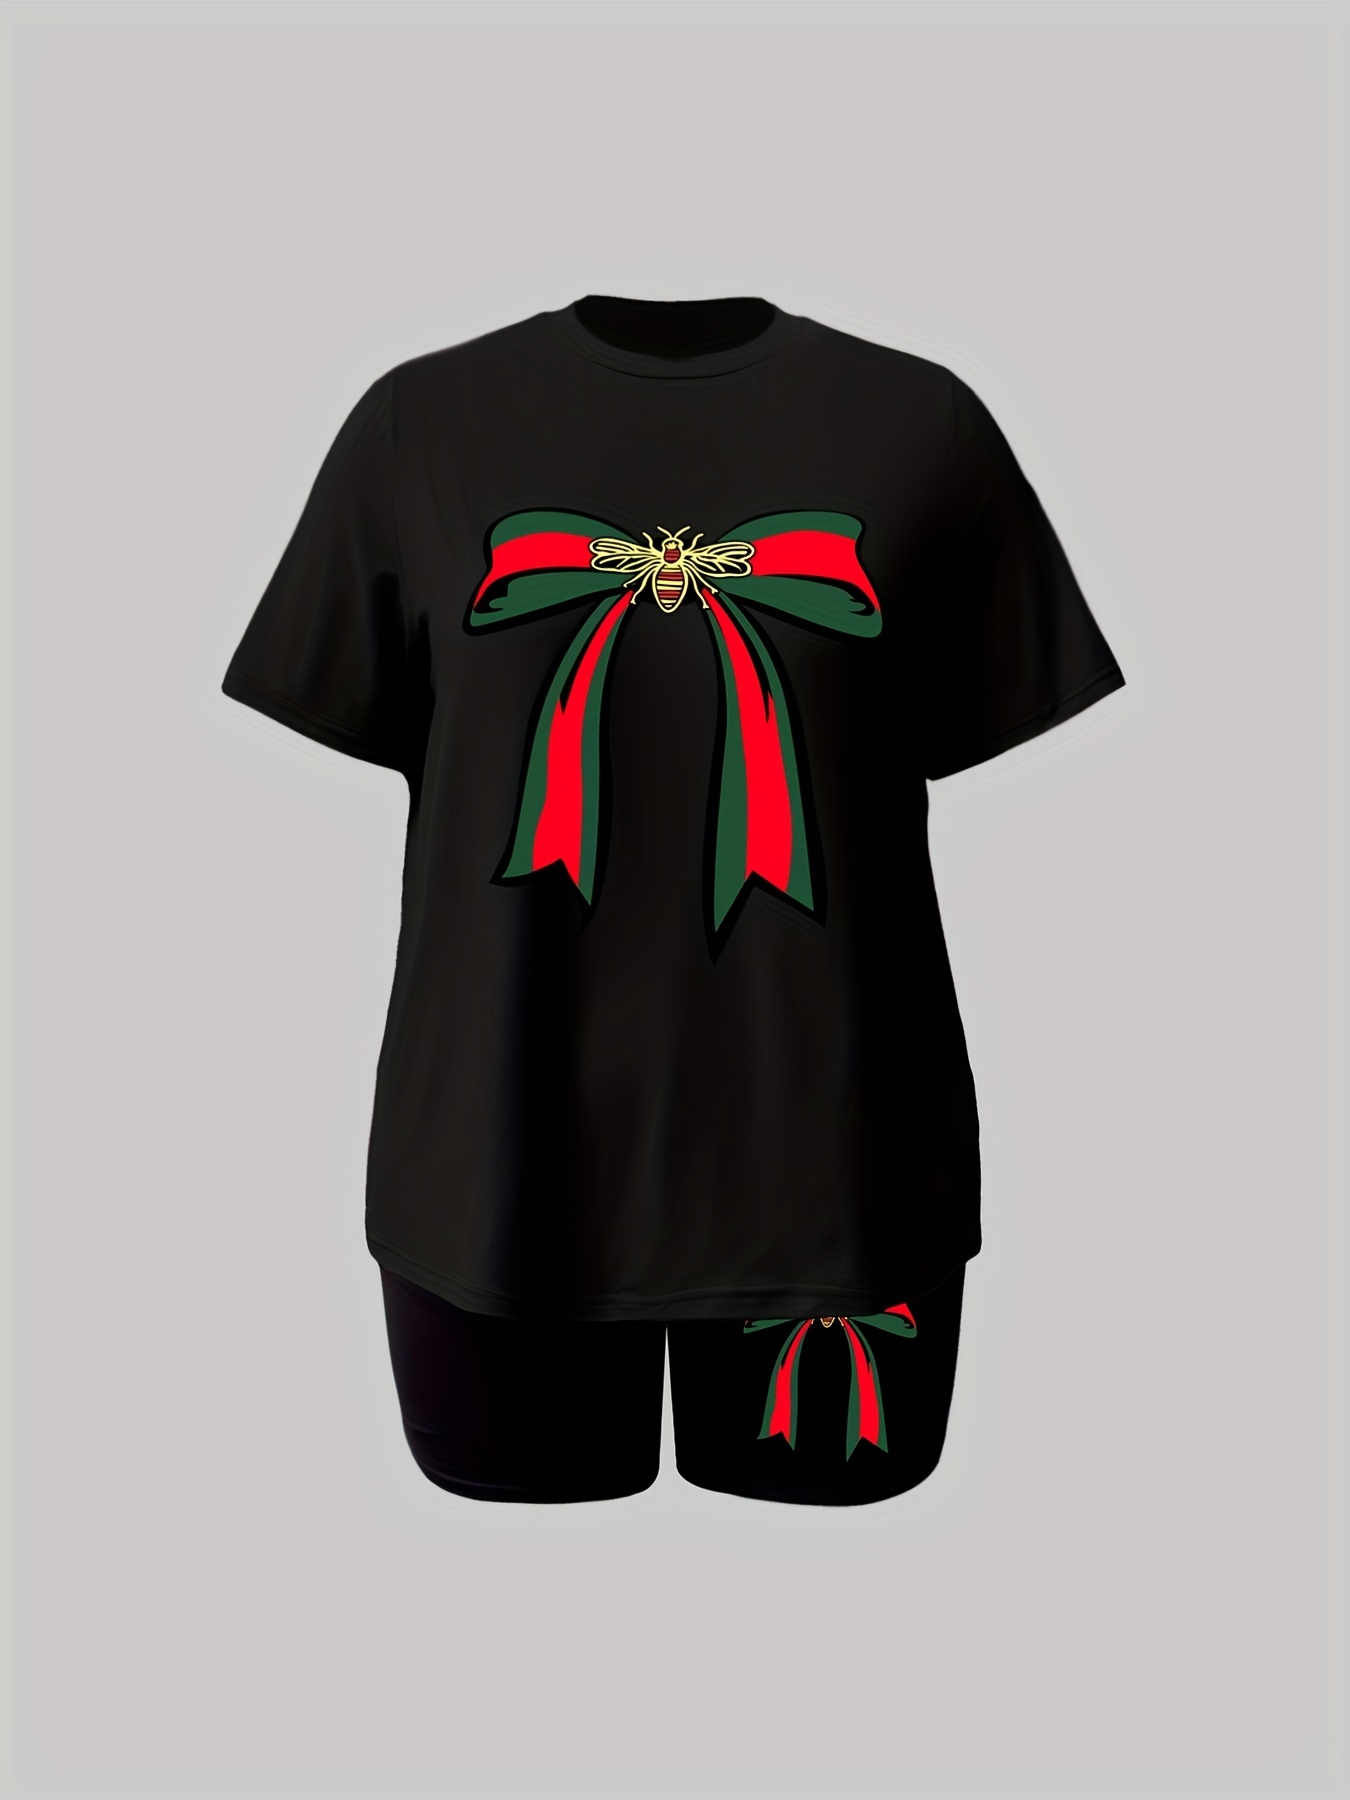 Gucci baby's two-piece outfits & sets